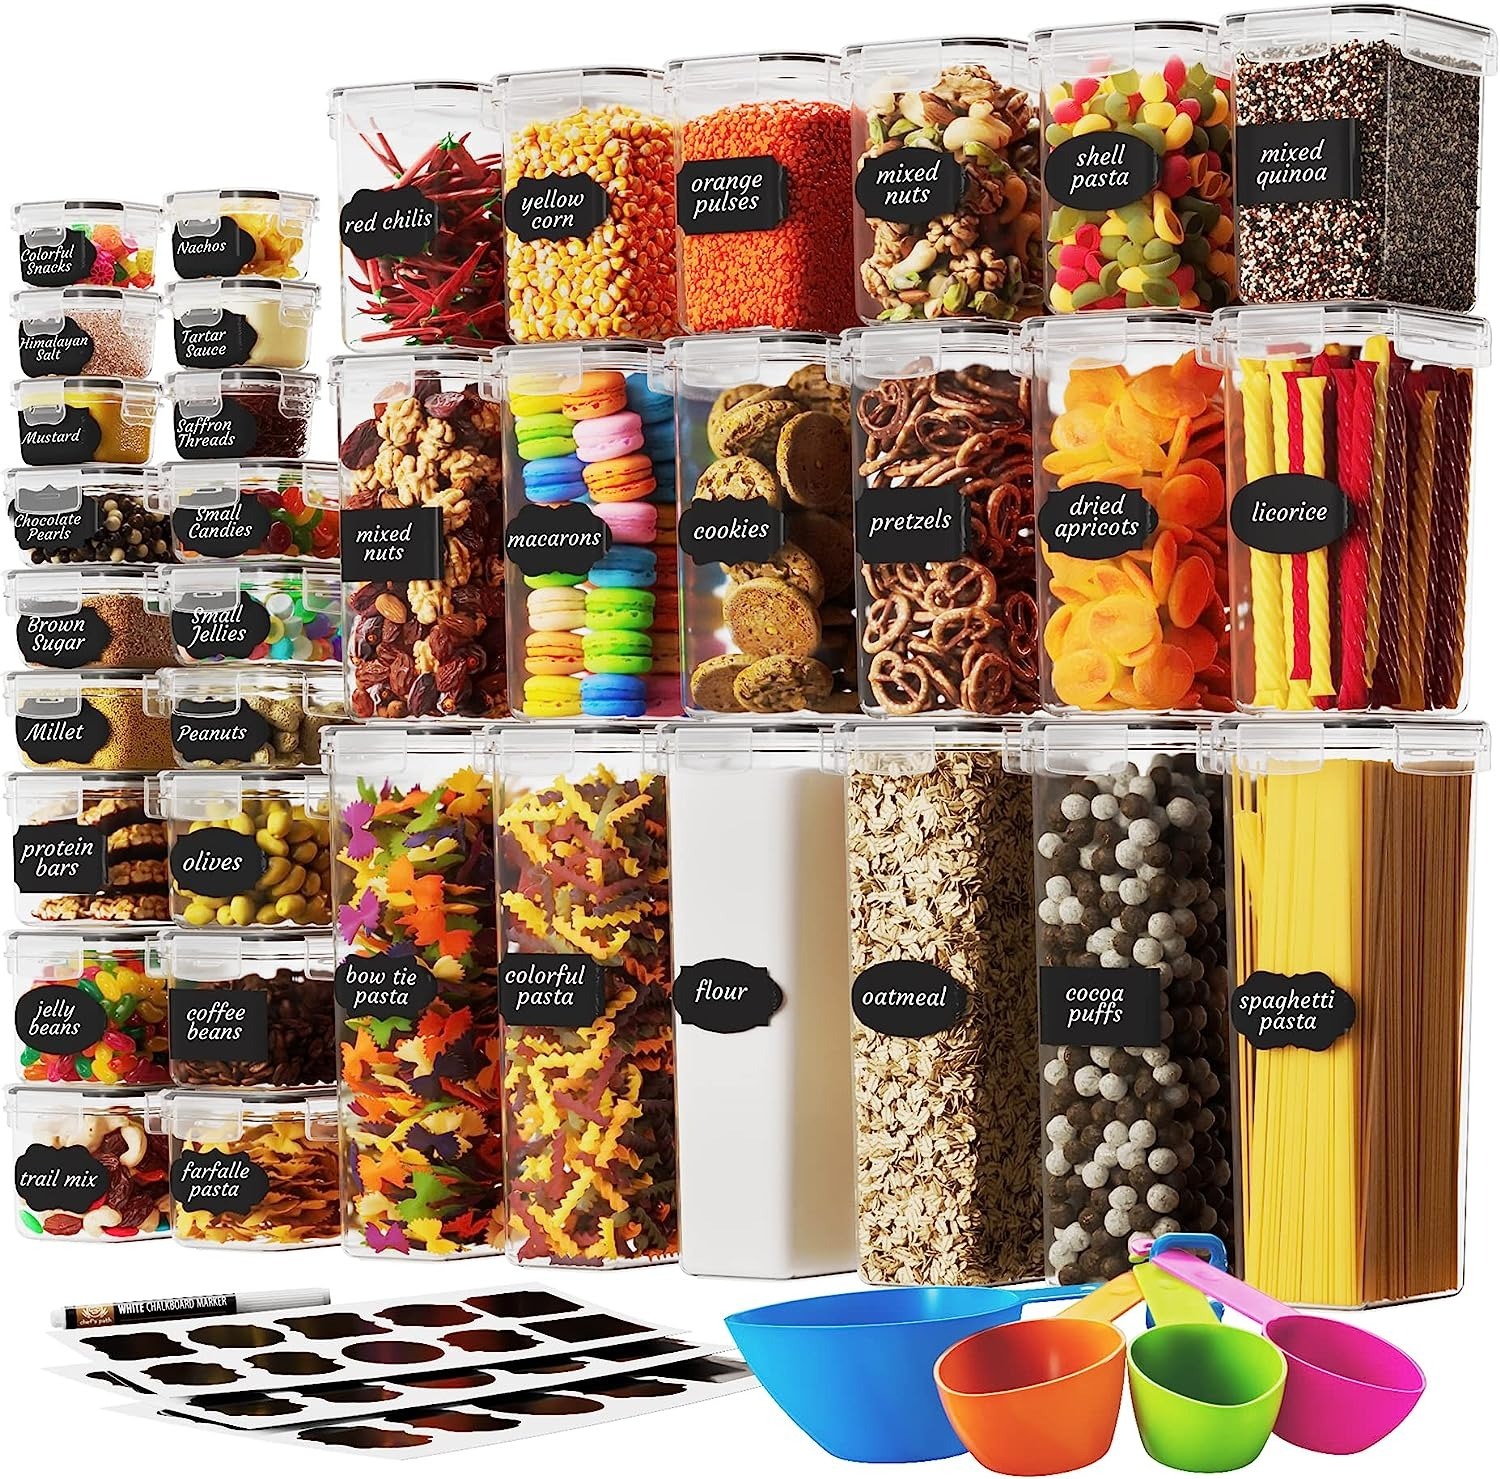 Chef's Path 36-Pack Variety Airtight Food Storage Container Set with Lids $39.19 + Free Shipping